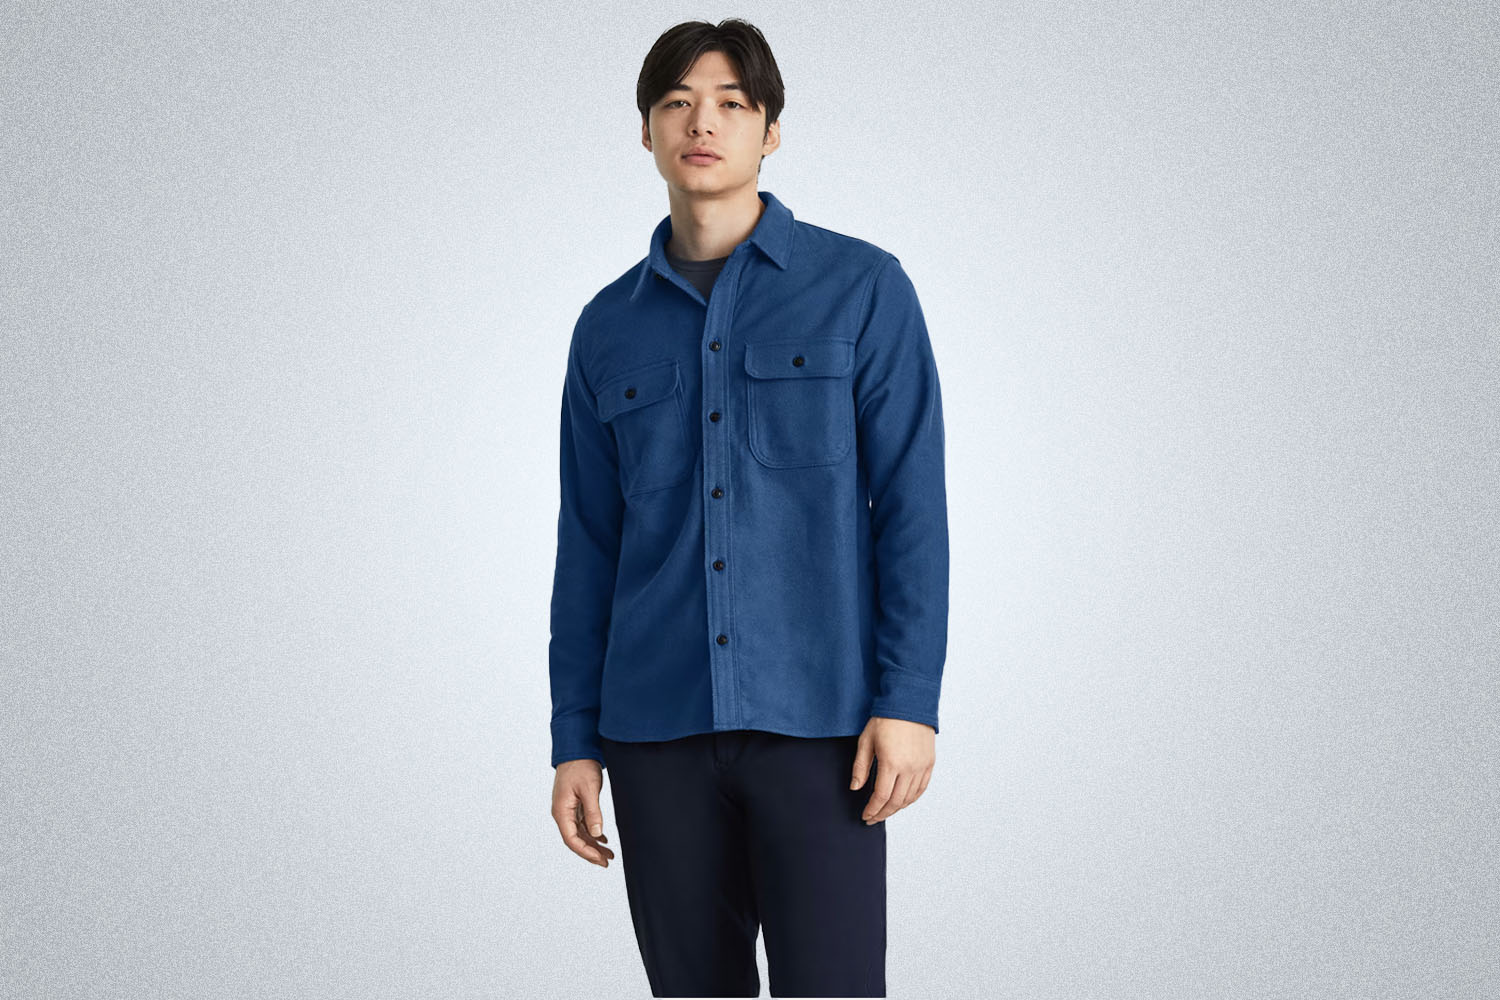 a model in a woven navy blue overshirt from Everlane on a grey background